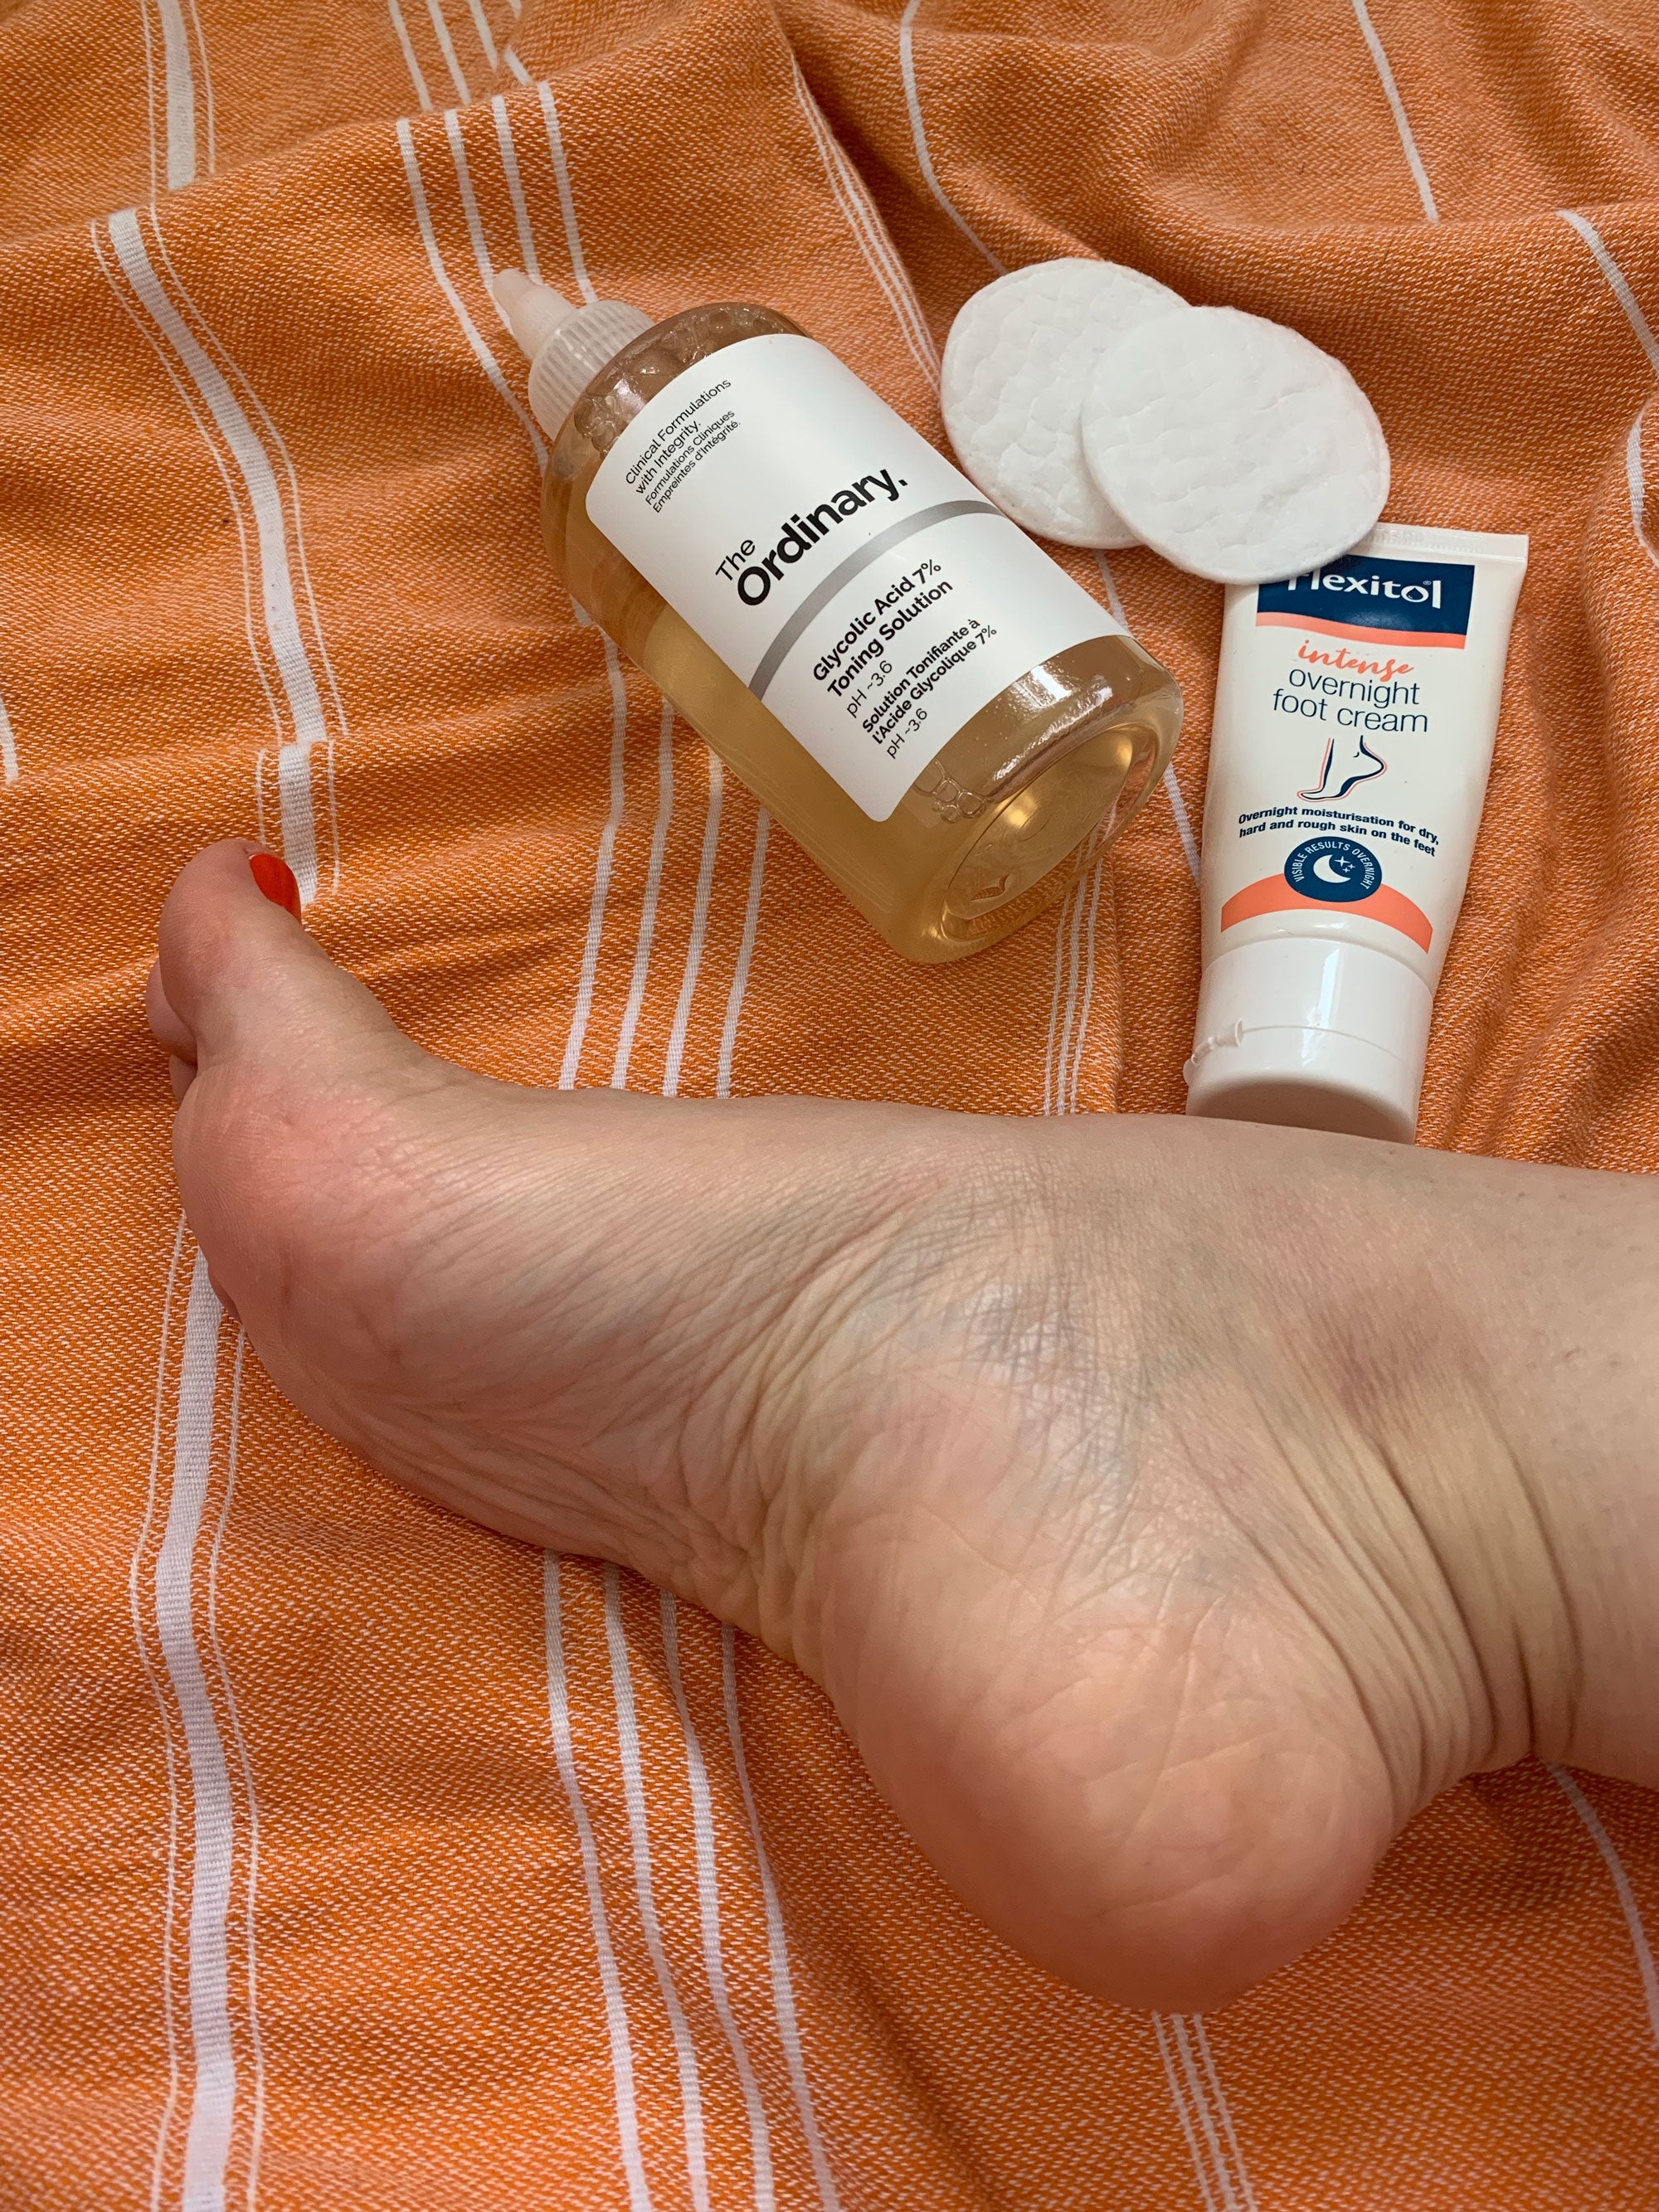 Benefits of Foot Cream: How to Use Foot Cream Effectively